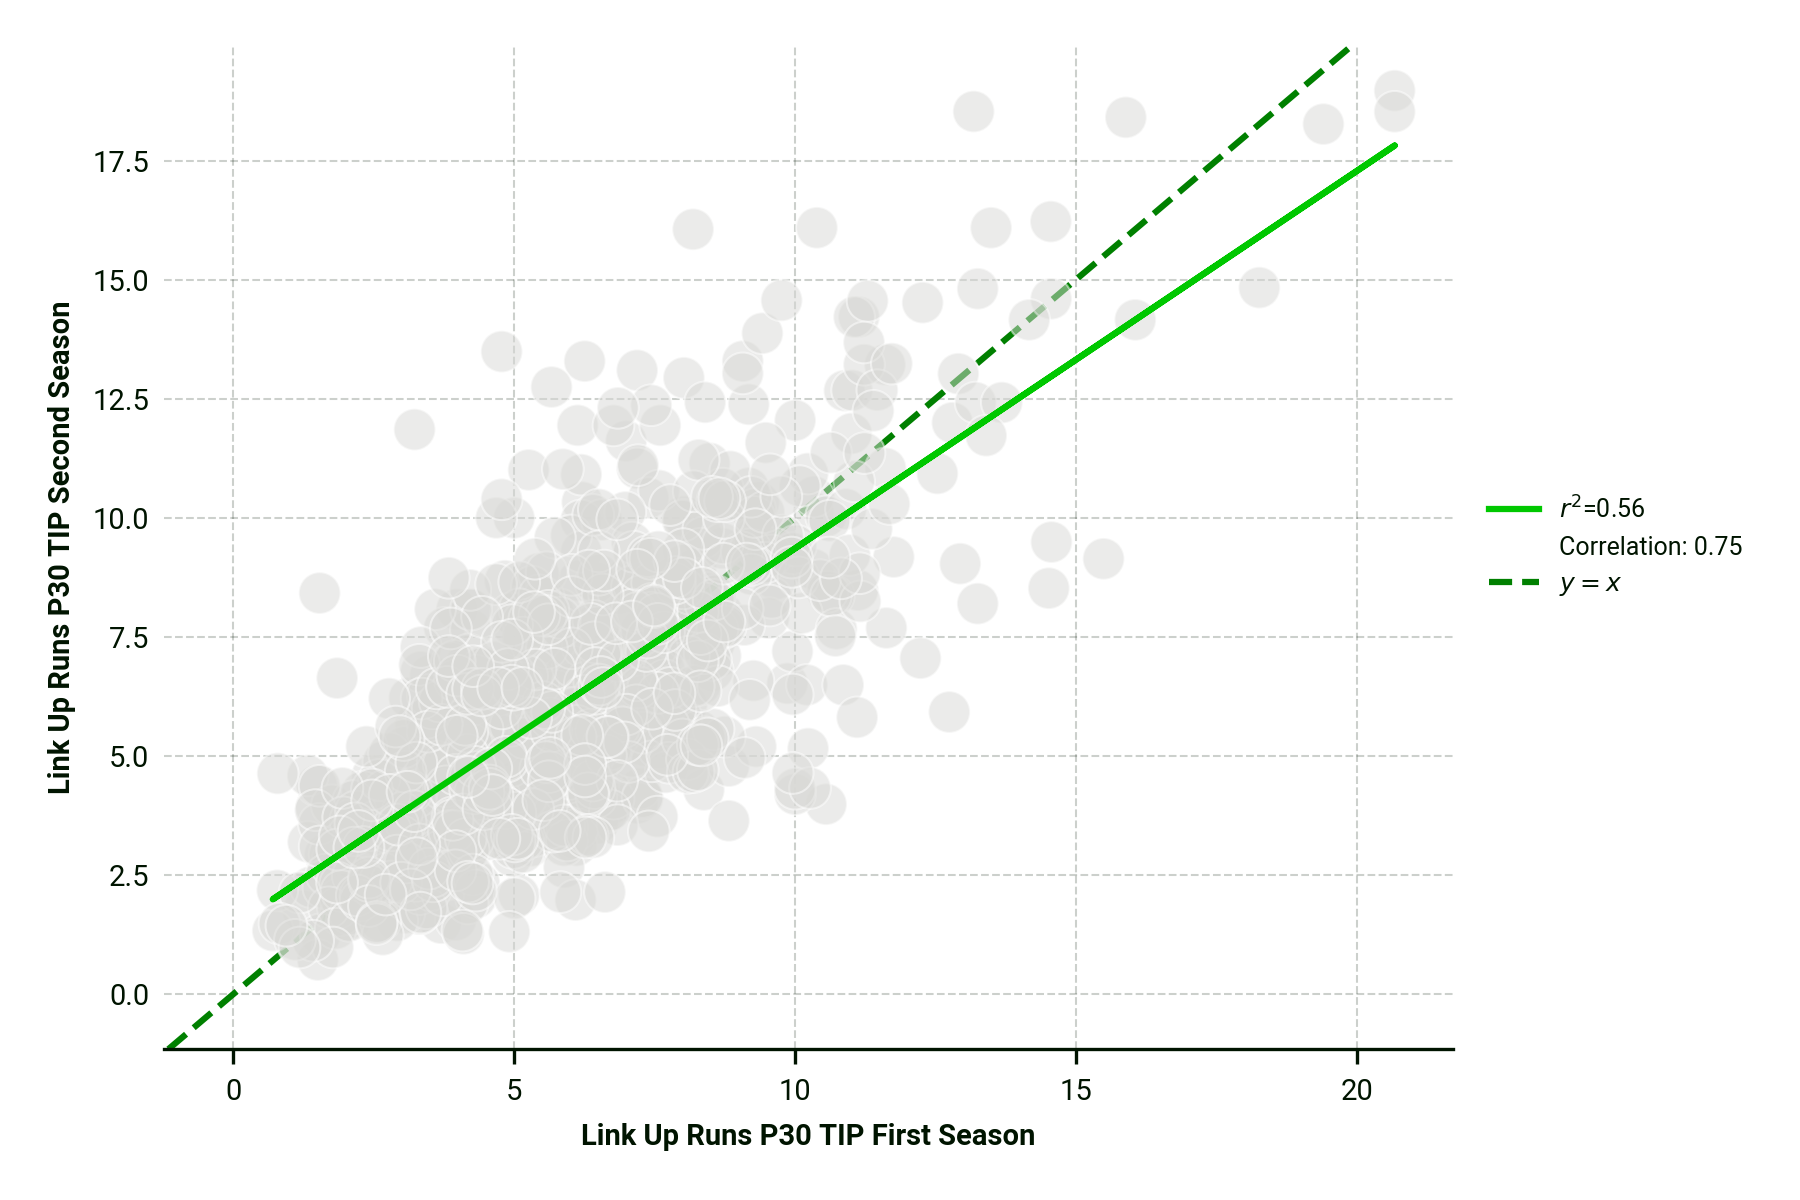 Figure 5: Correlation between Link Up Runs from one season to the next (staying with same club).